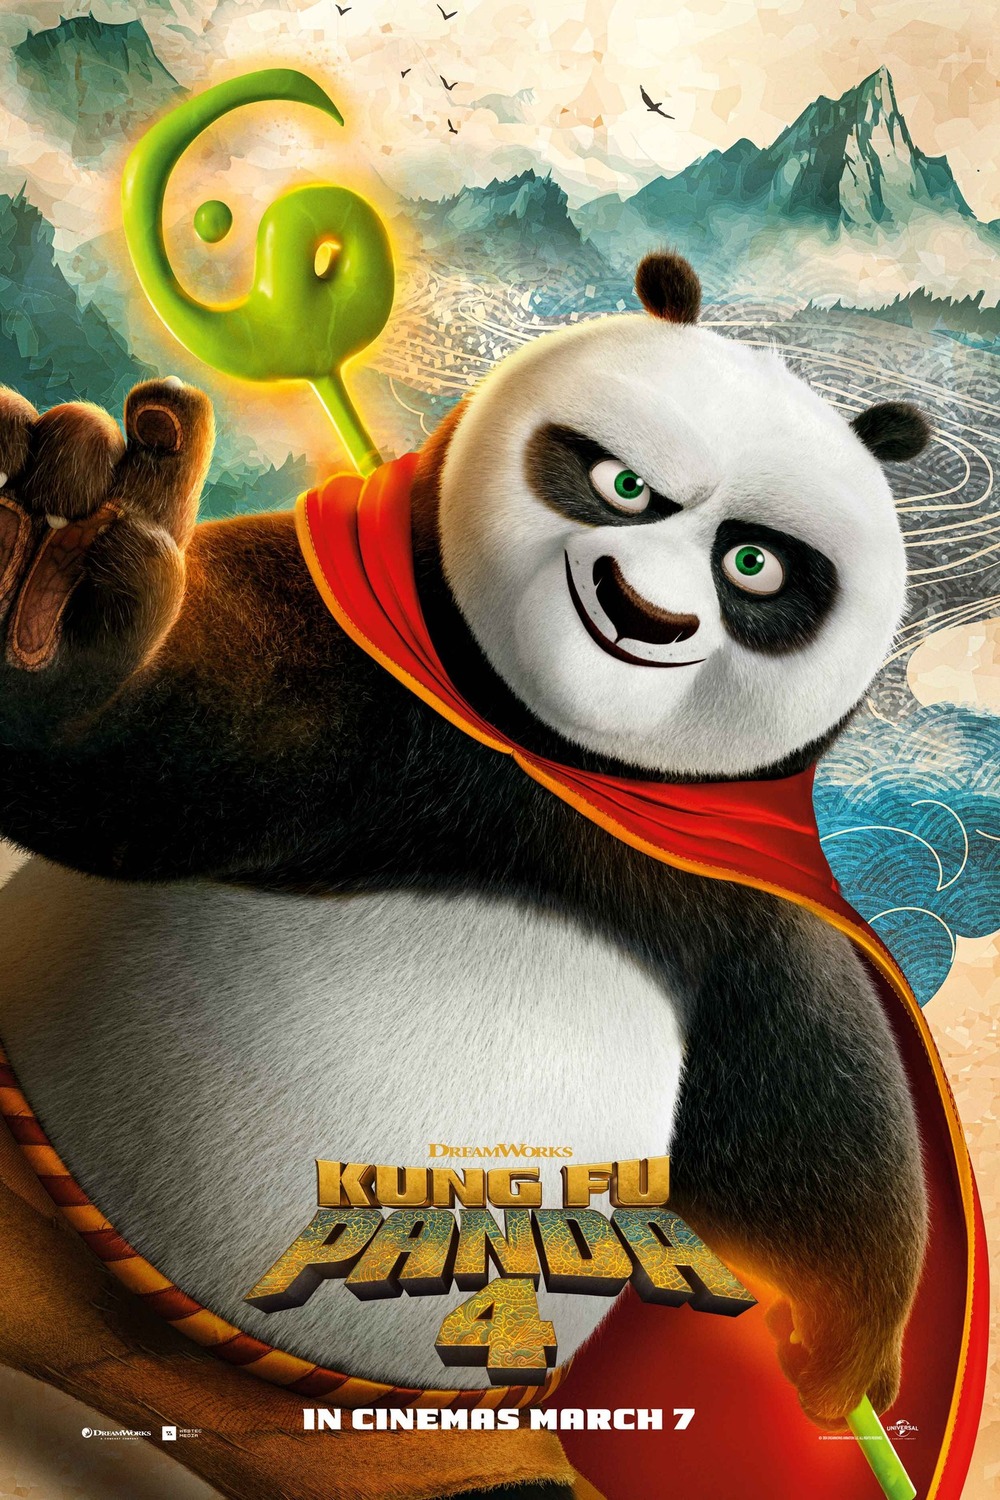 Extra Large Movie Poster Image for Kung Fu Panda 4 (#5 of 20)